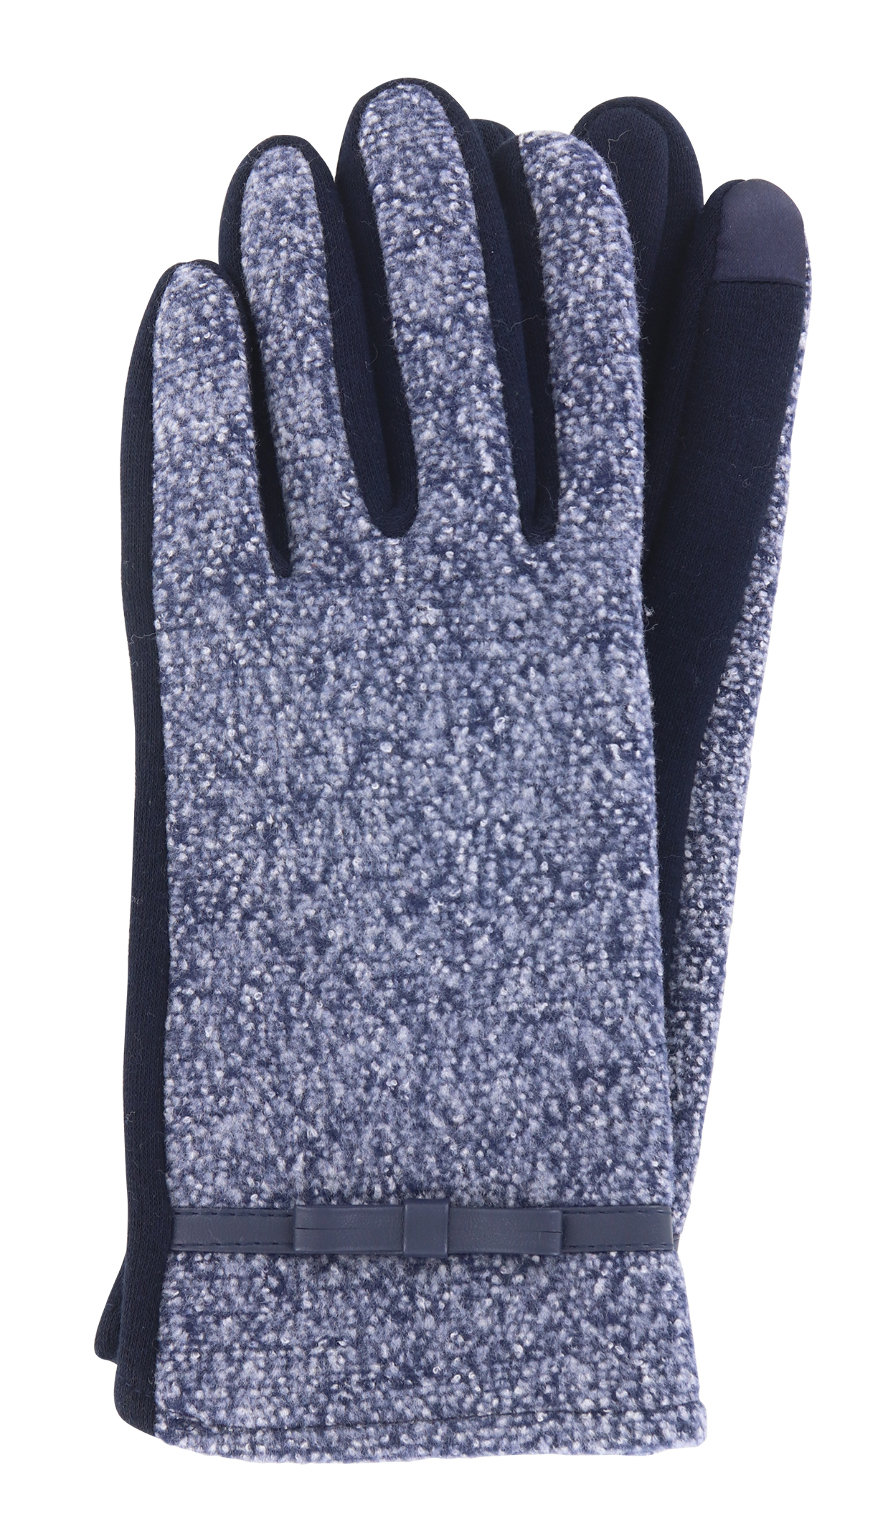 Jack and Miss Two Tone Women's Texting Gloves - Assorted Colors